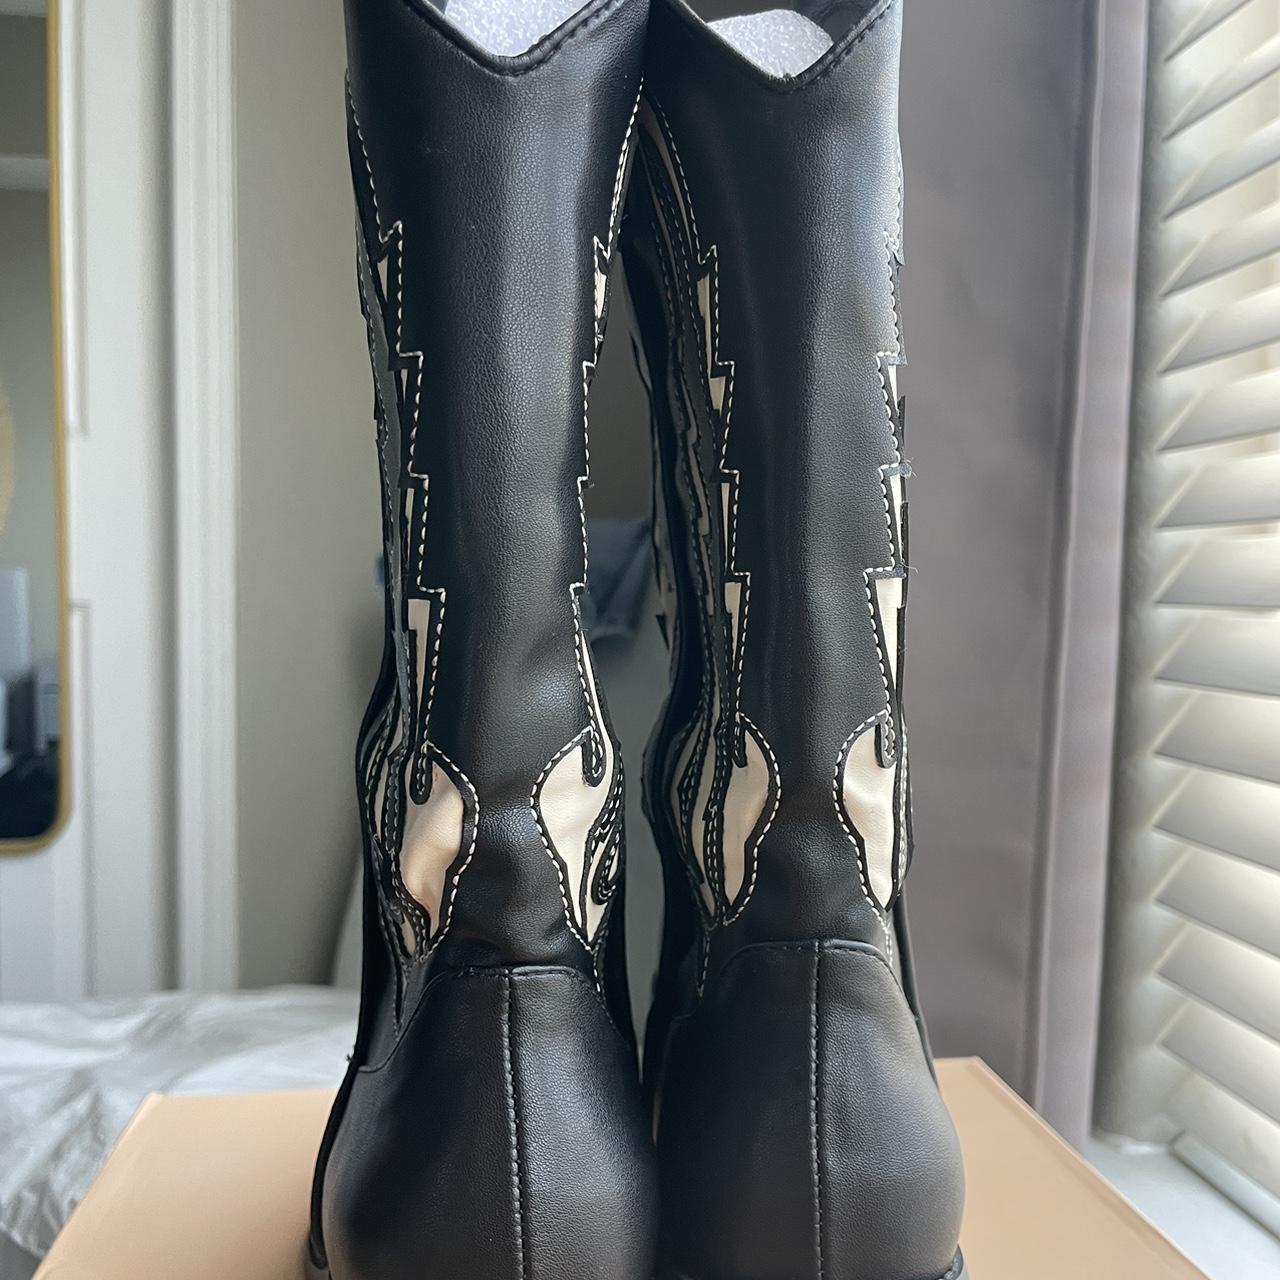 Women's Black and White Boots | Depop